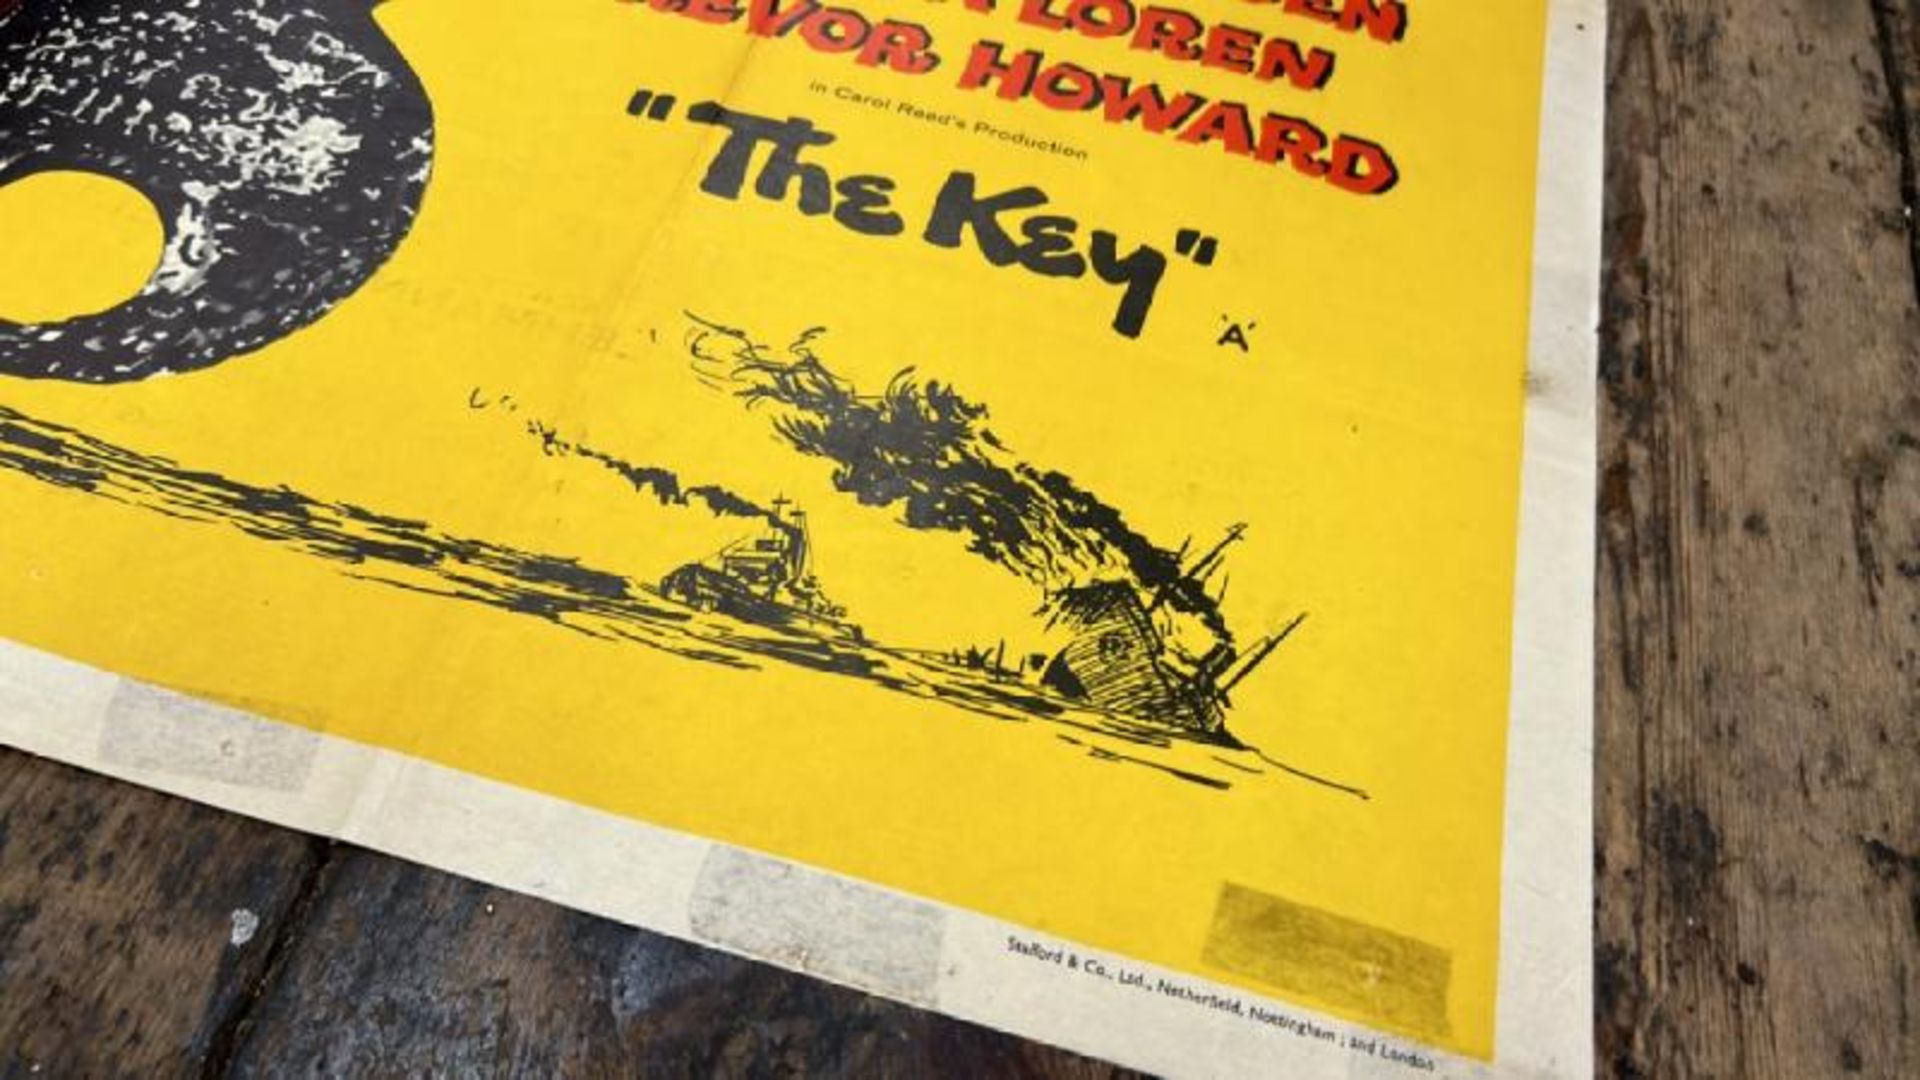 THE KEY, ORIGINAL FILM POSTER, PRINTED IN ENGLAND BY STAFFORD & CO, TAPE TO THE REAR, 10125CM W X - Image 2 of 5